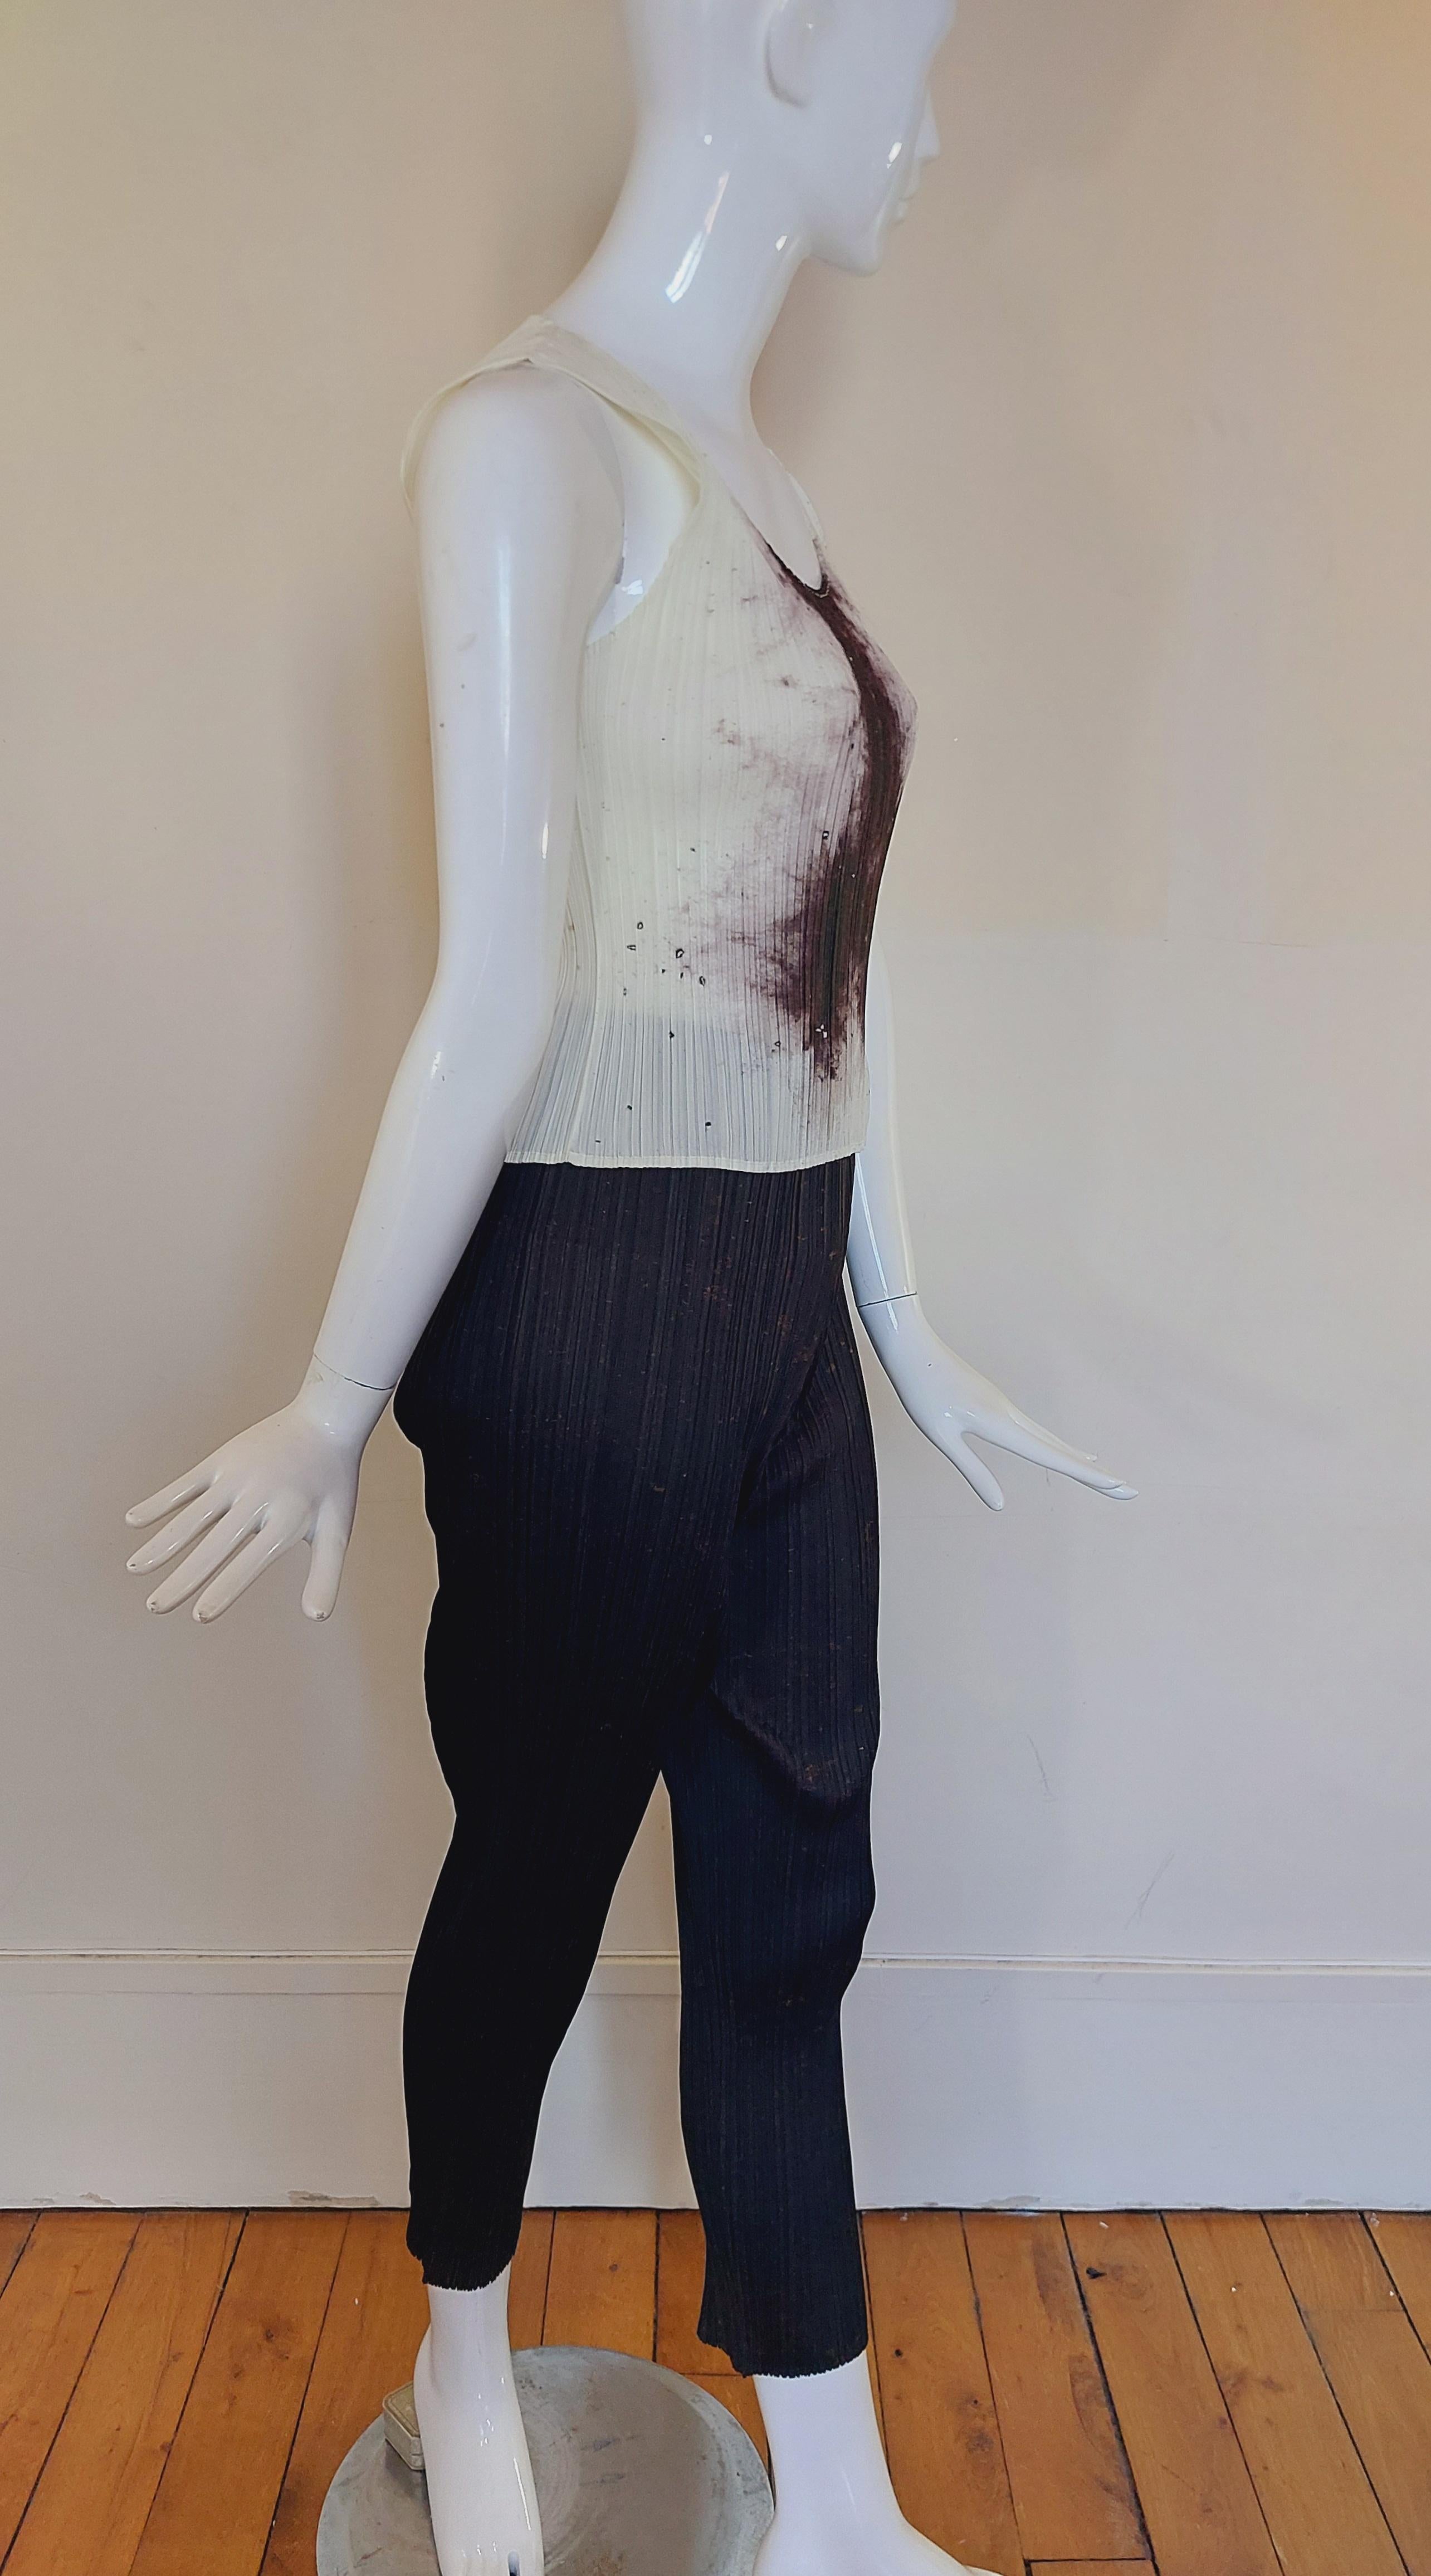 Pleats Please By Issey Miyake Guest Artist Series No. 4 Cai Guo-Qiang Gunpowder Runway Pants Trousers 1998

THE MATCHING GUNPOWDER TOP SOLD SEPARATELY. If you are interested in, PM me! ;)

A rare and coveted Pleats Please by Issey Miyake pants from